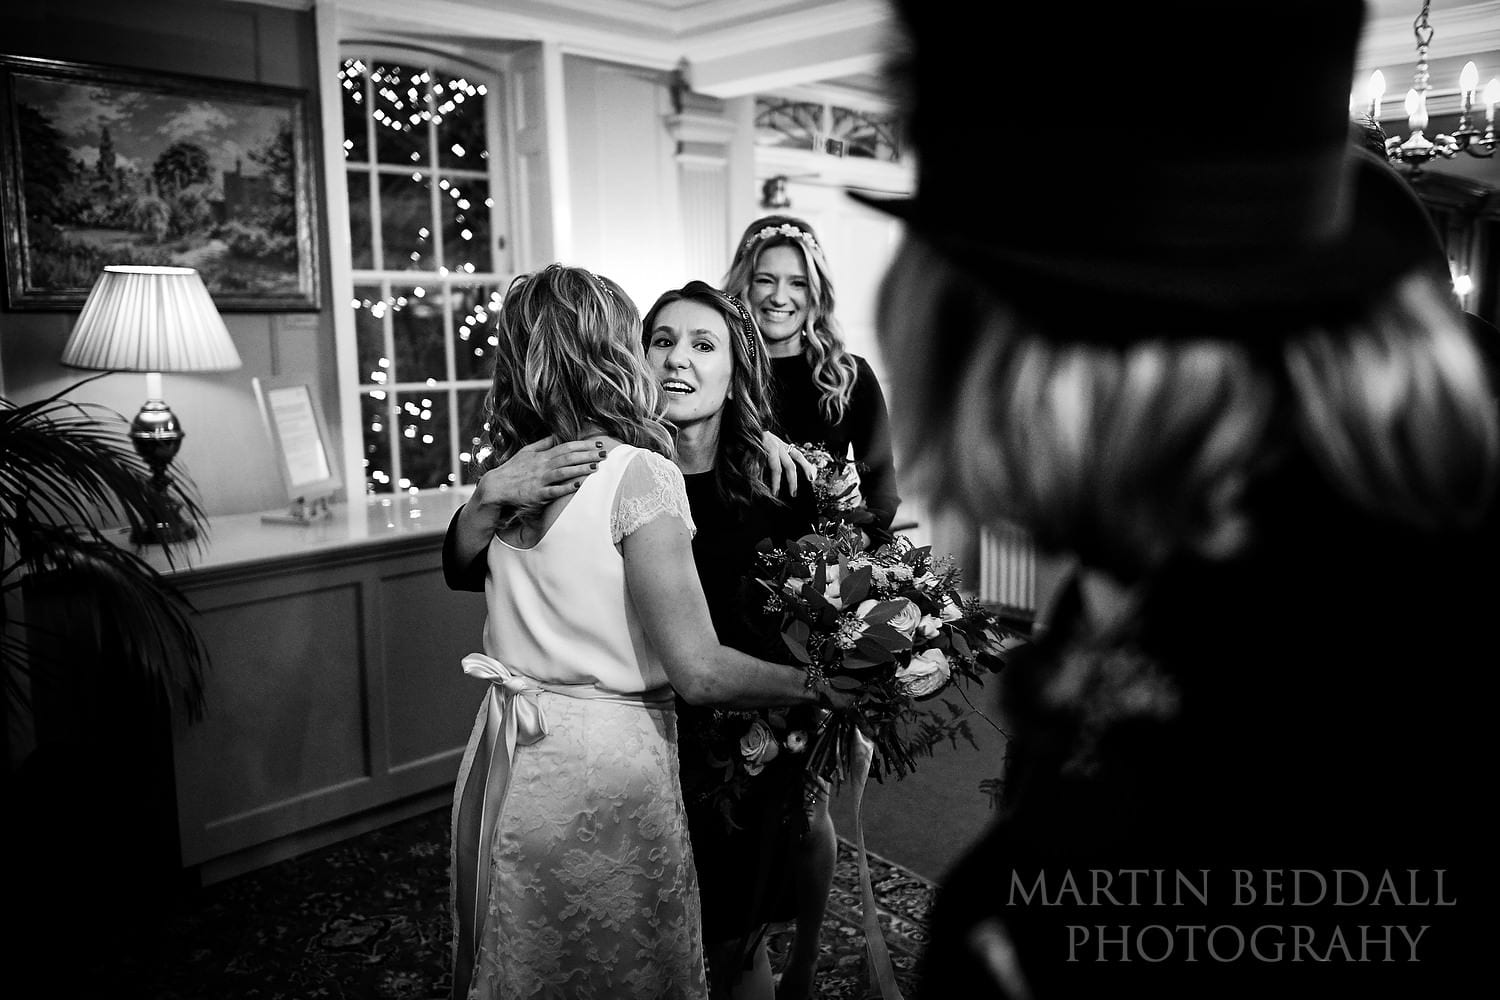 Greeting the bride and groom after the ceremony at Burgh House